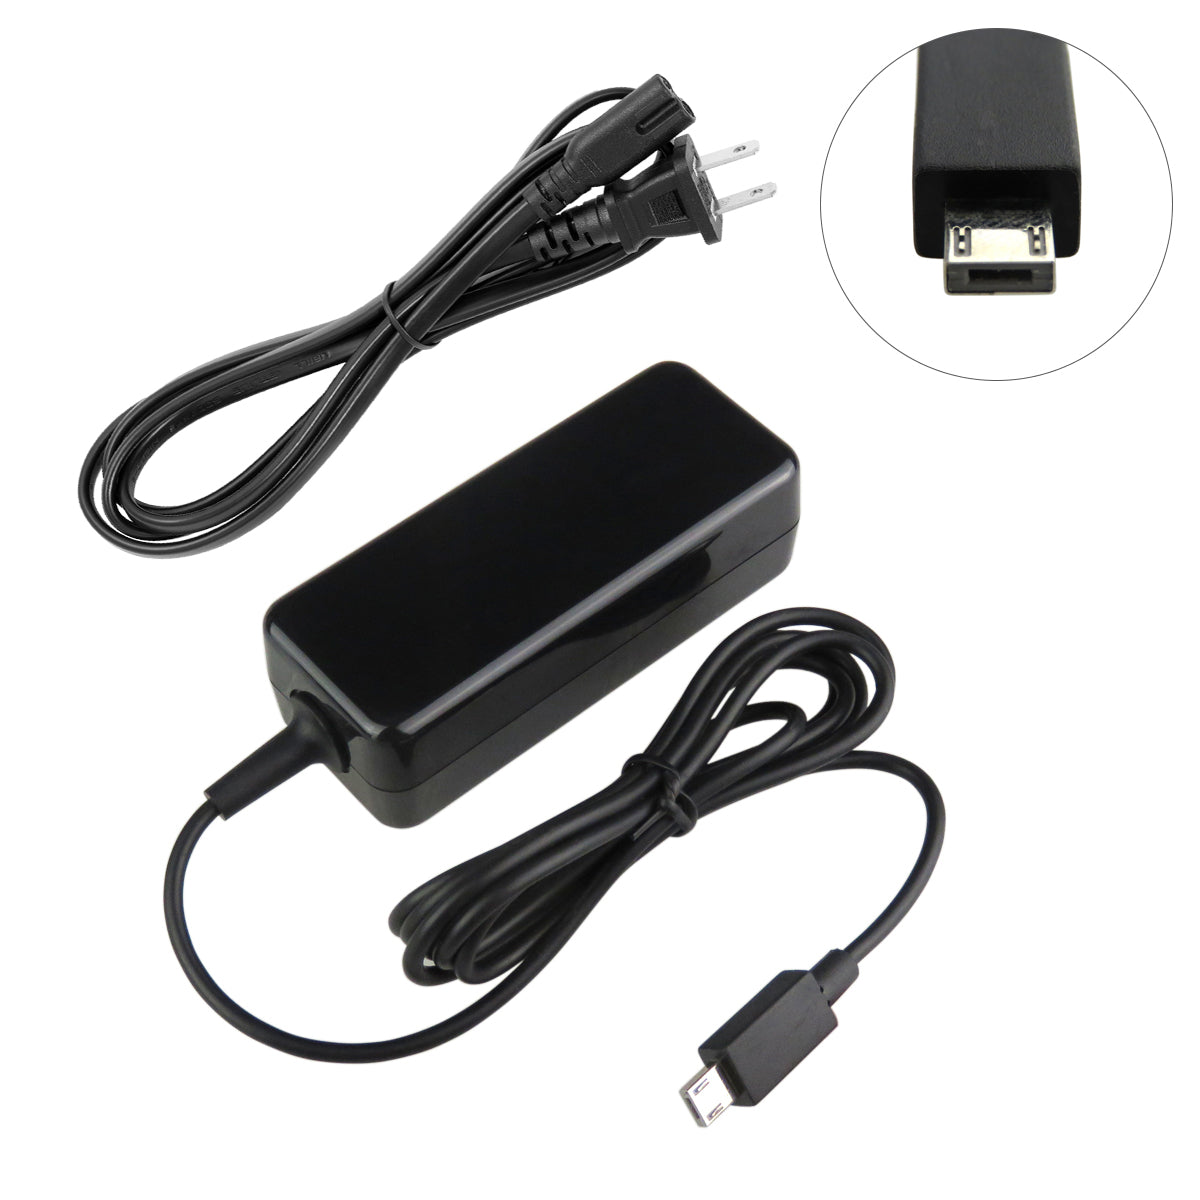 Charger for ASUS EeeBook X205TA-HATM1102M Laptop.